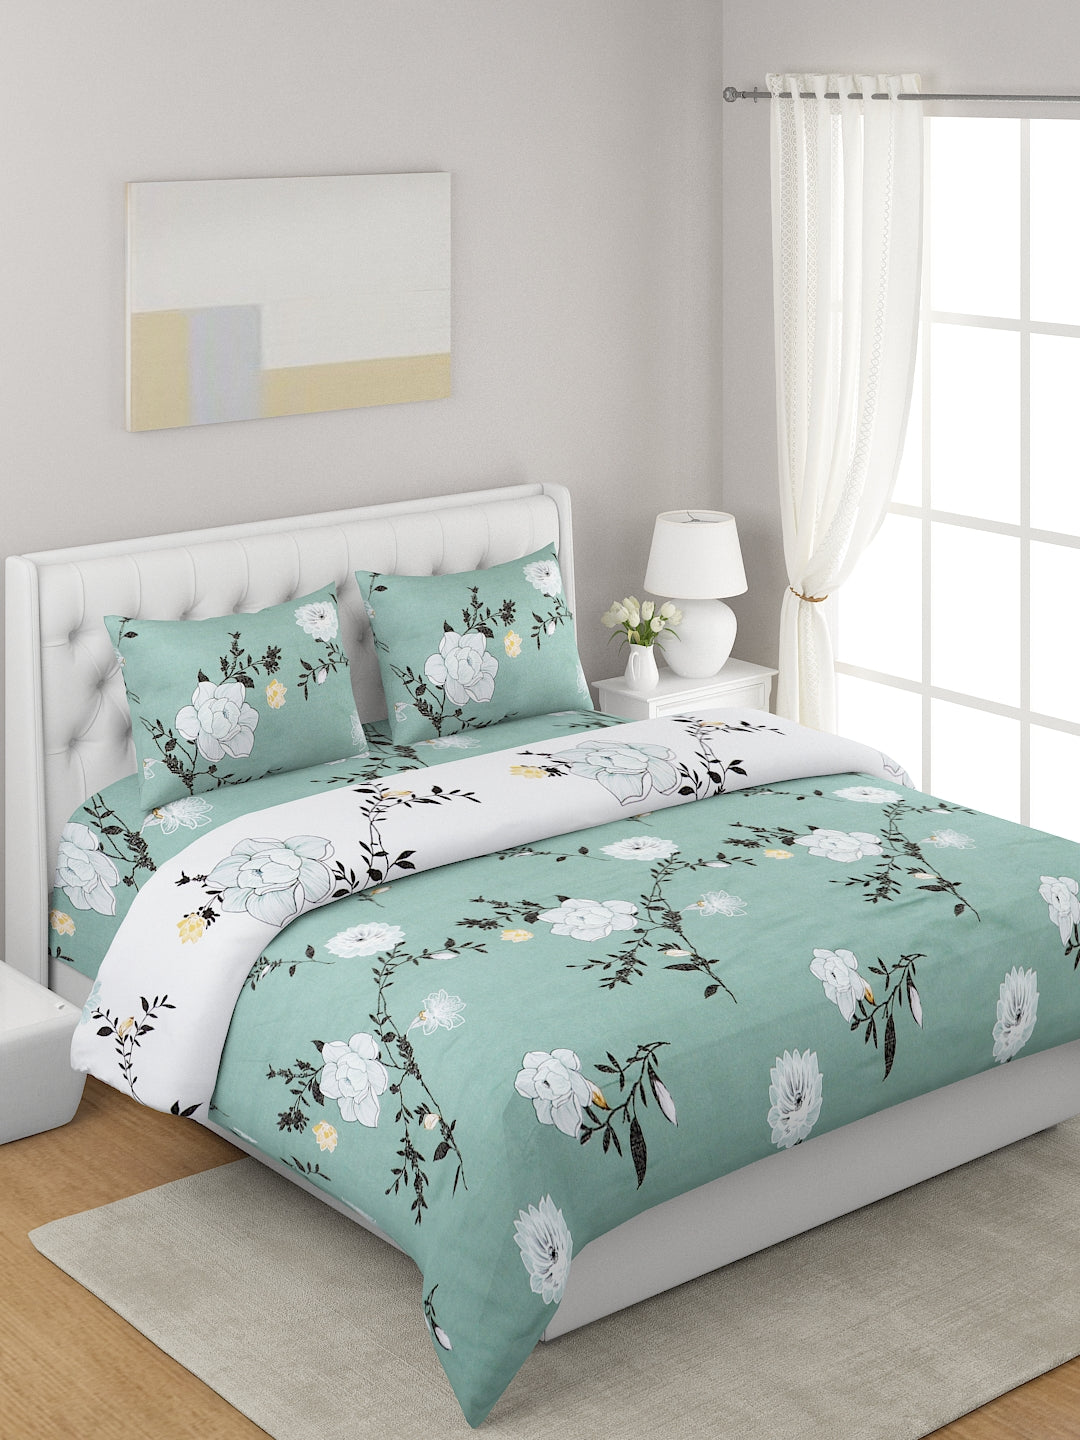 Green & White 4 Pcs Floral Printed Double Queen Bedding Set